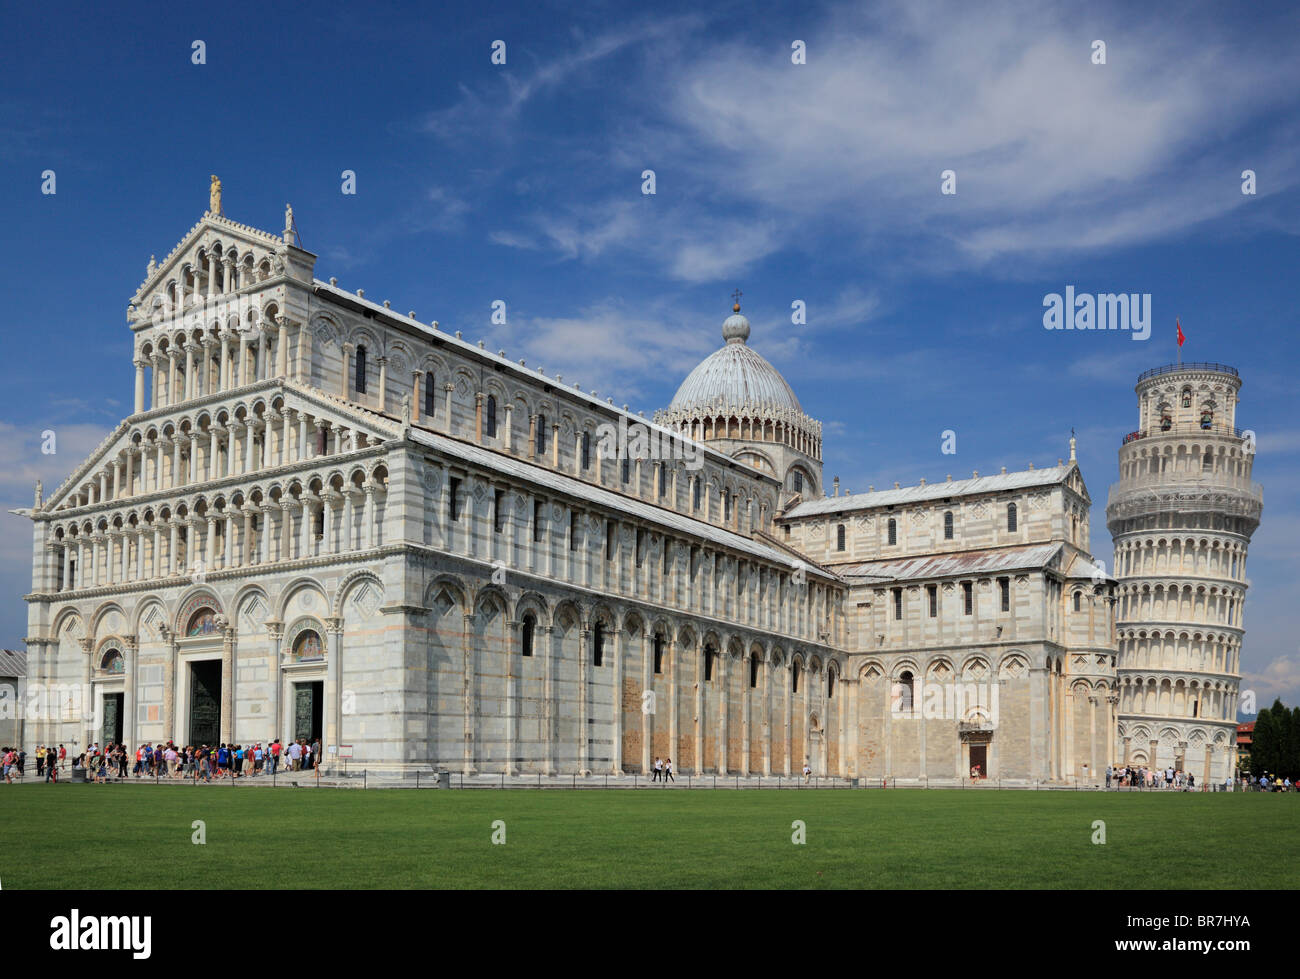 The Duomo and iconic Leaning Tower in Pisa's Square of MIracles, Italy Stock Photo